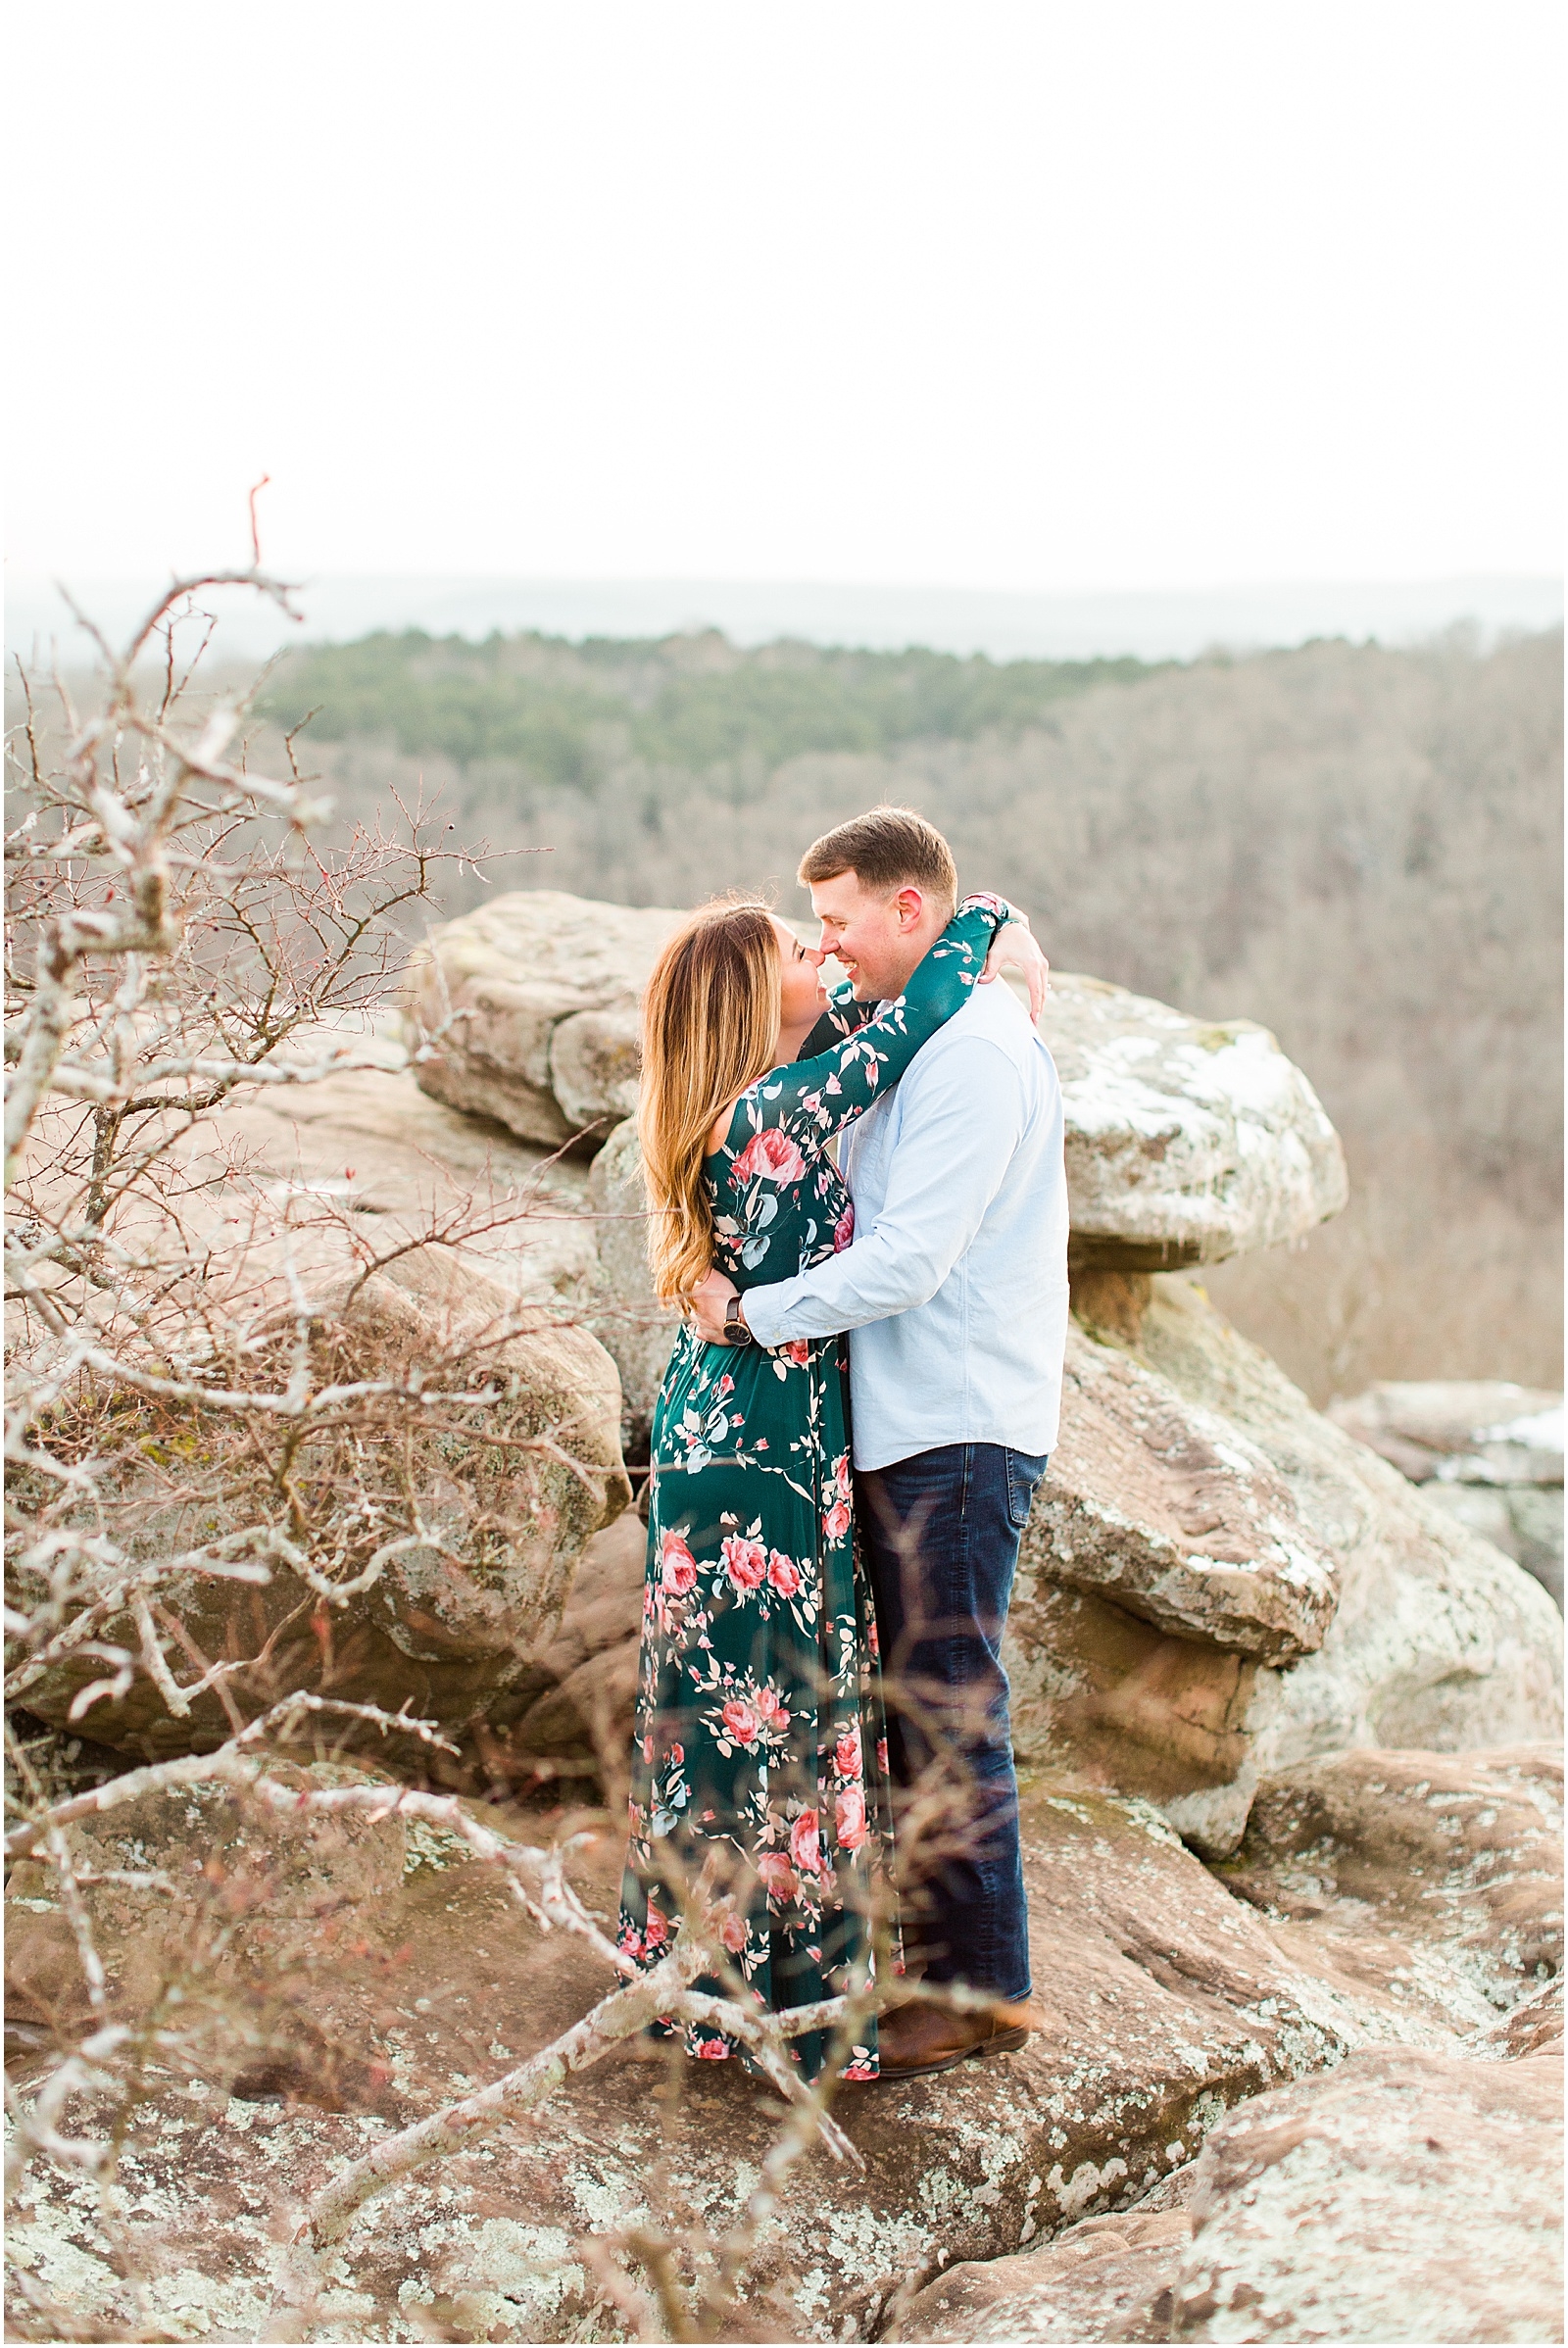 A Sunny Garden of the Gods Engagement Session | Shiloh and Lee | Bret and Brandie Photography097.jpg